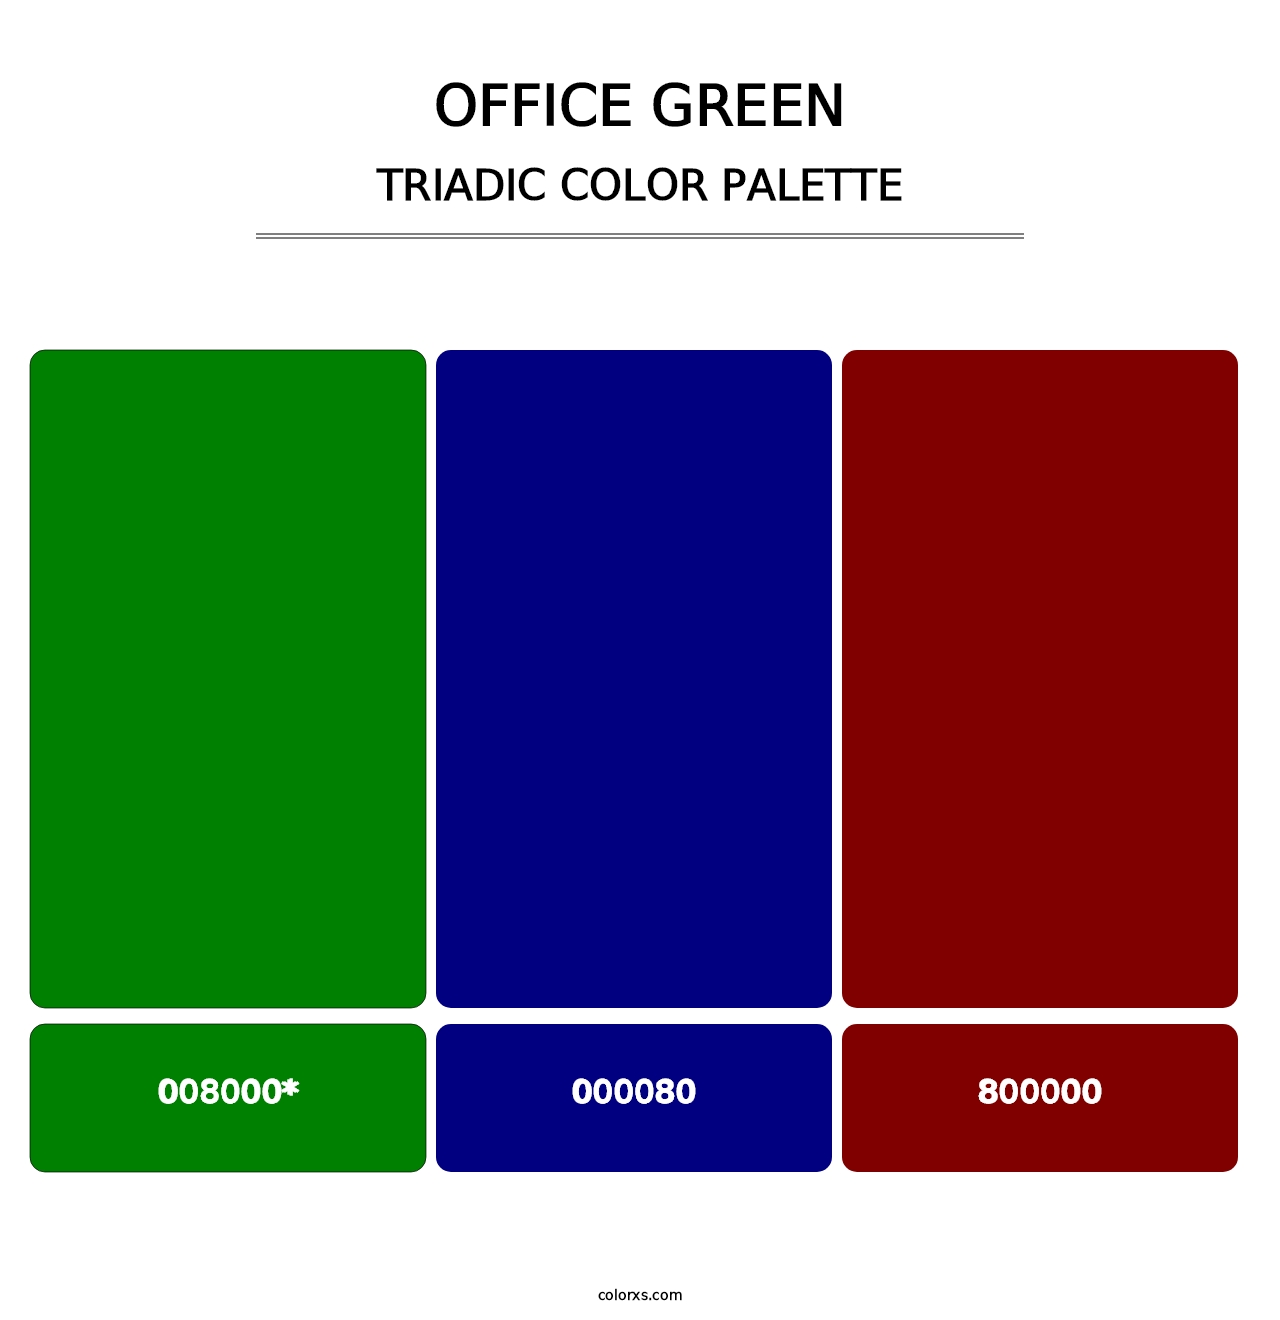 Office Green - Triadic Color Palette